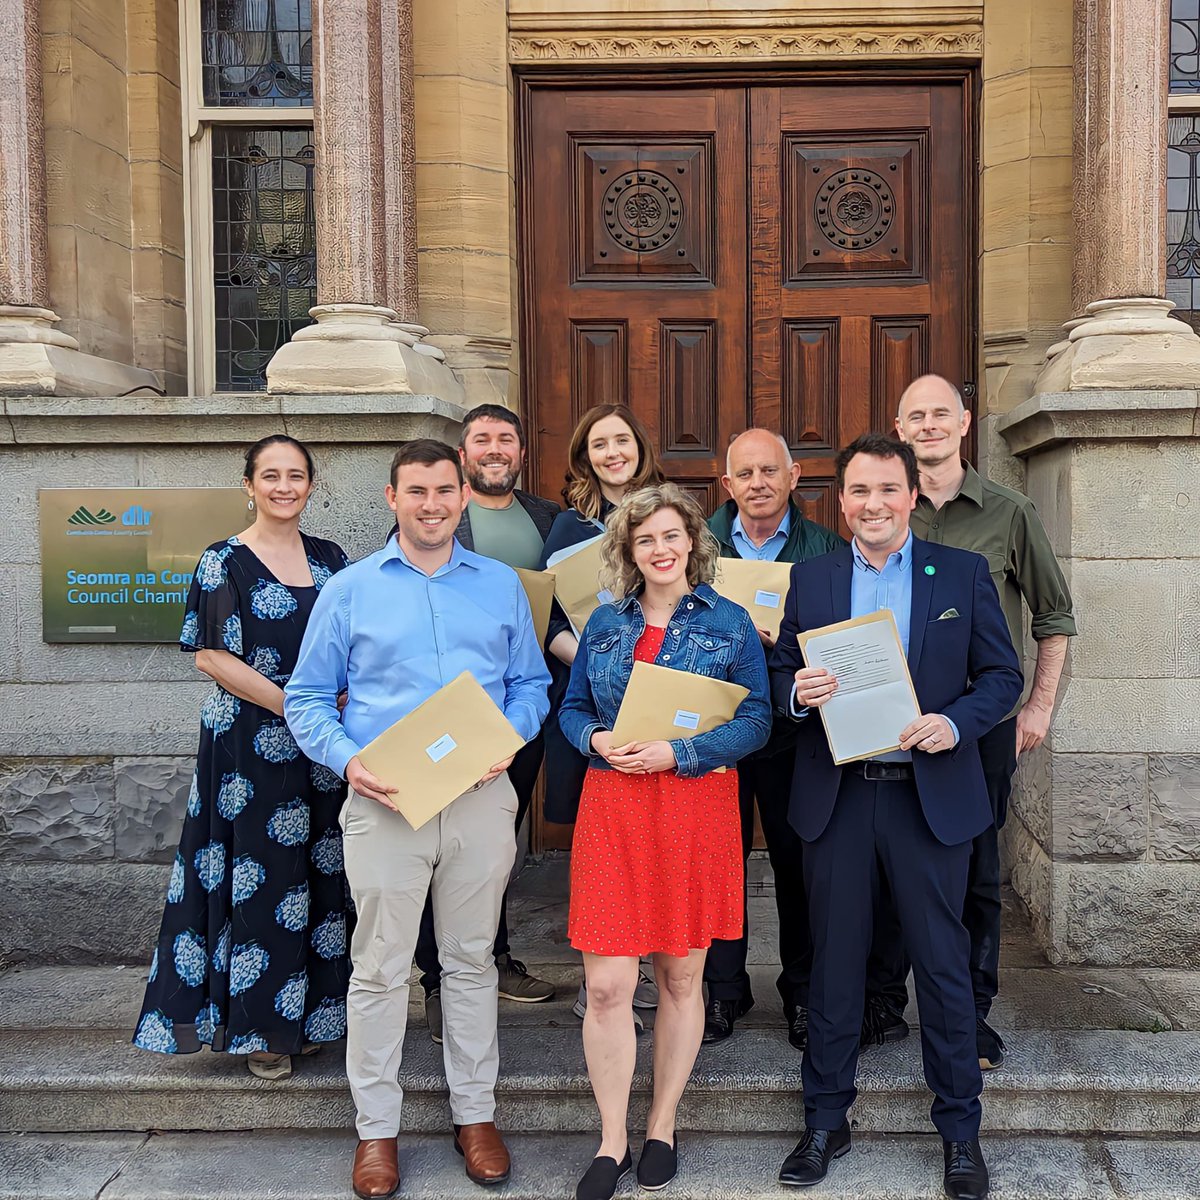 It’s official 🗳️ The nomination papers have been signed. On the 7th June, you can #VoteKivlehan no.1 🌱 Dún Laoghaire, let’s #KeepGoingGreen!